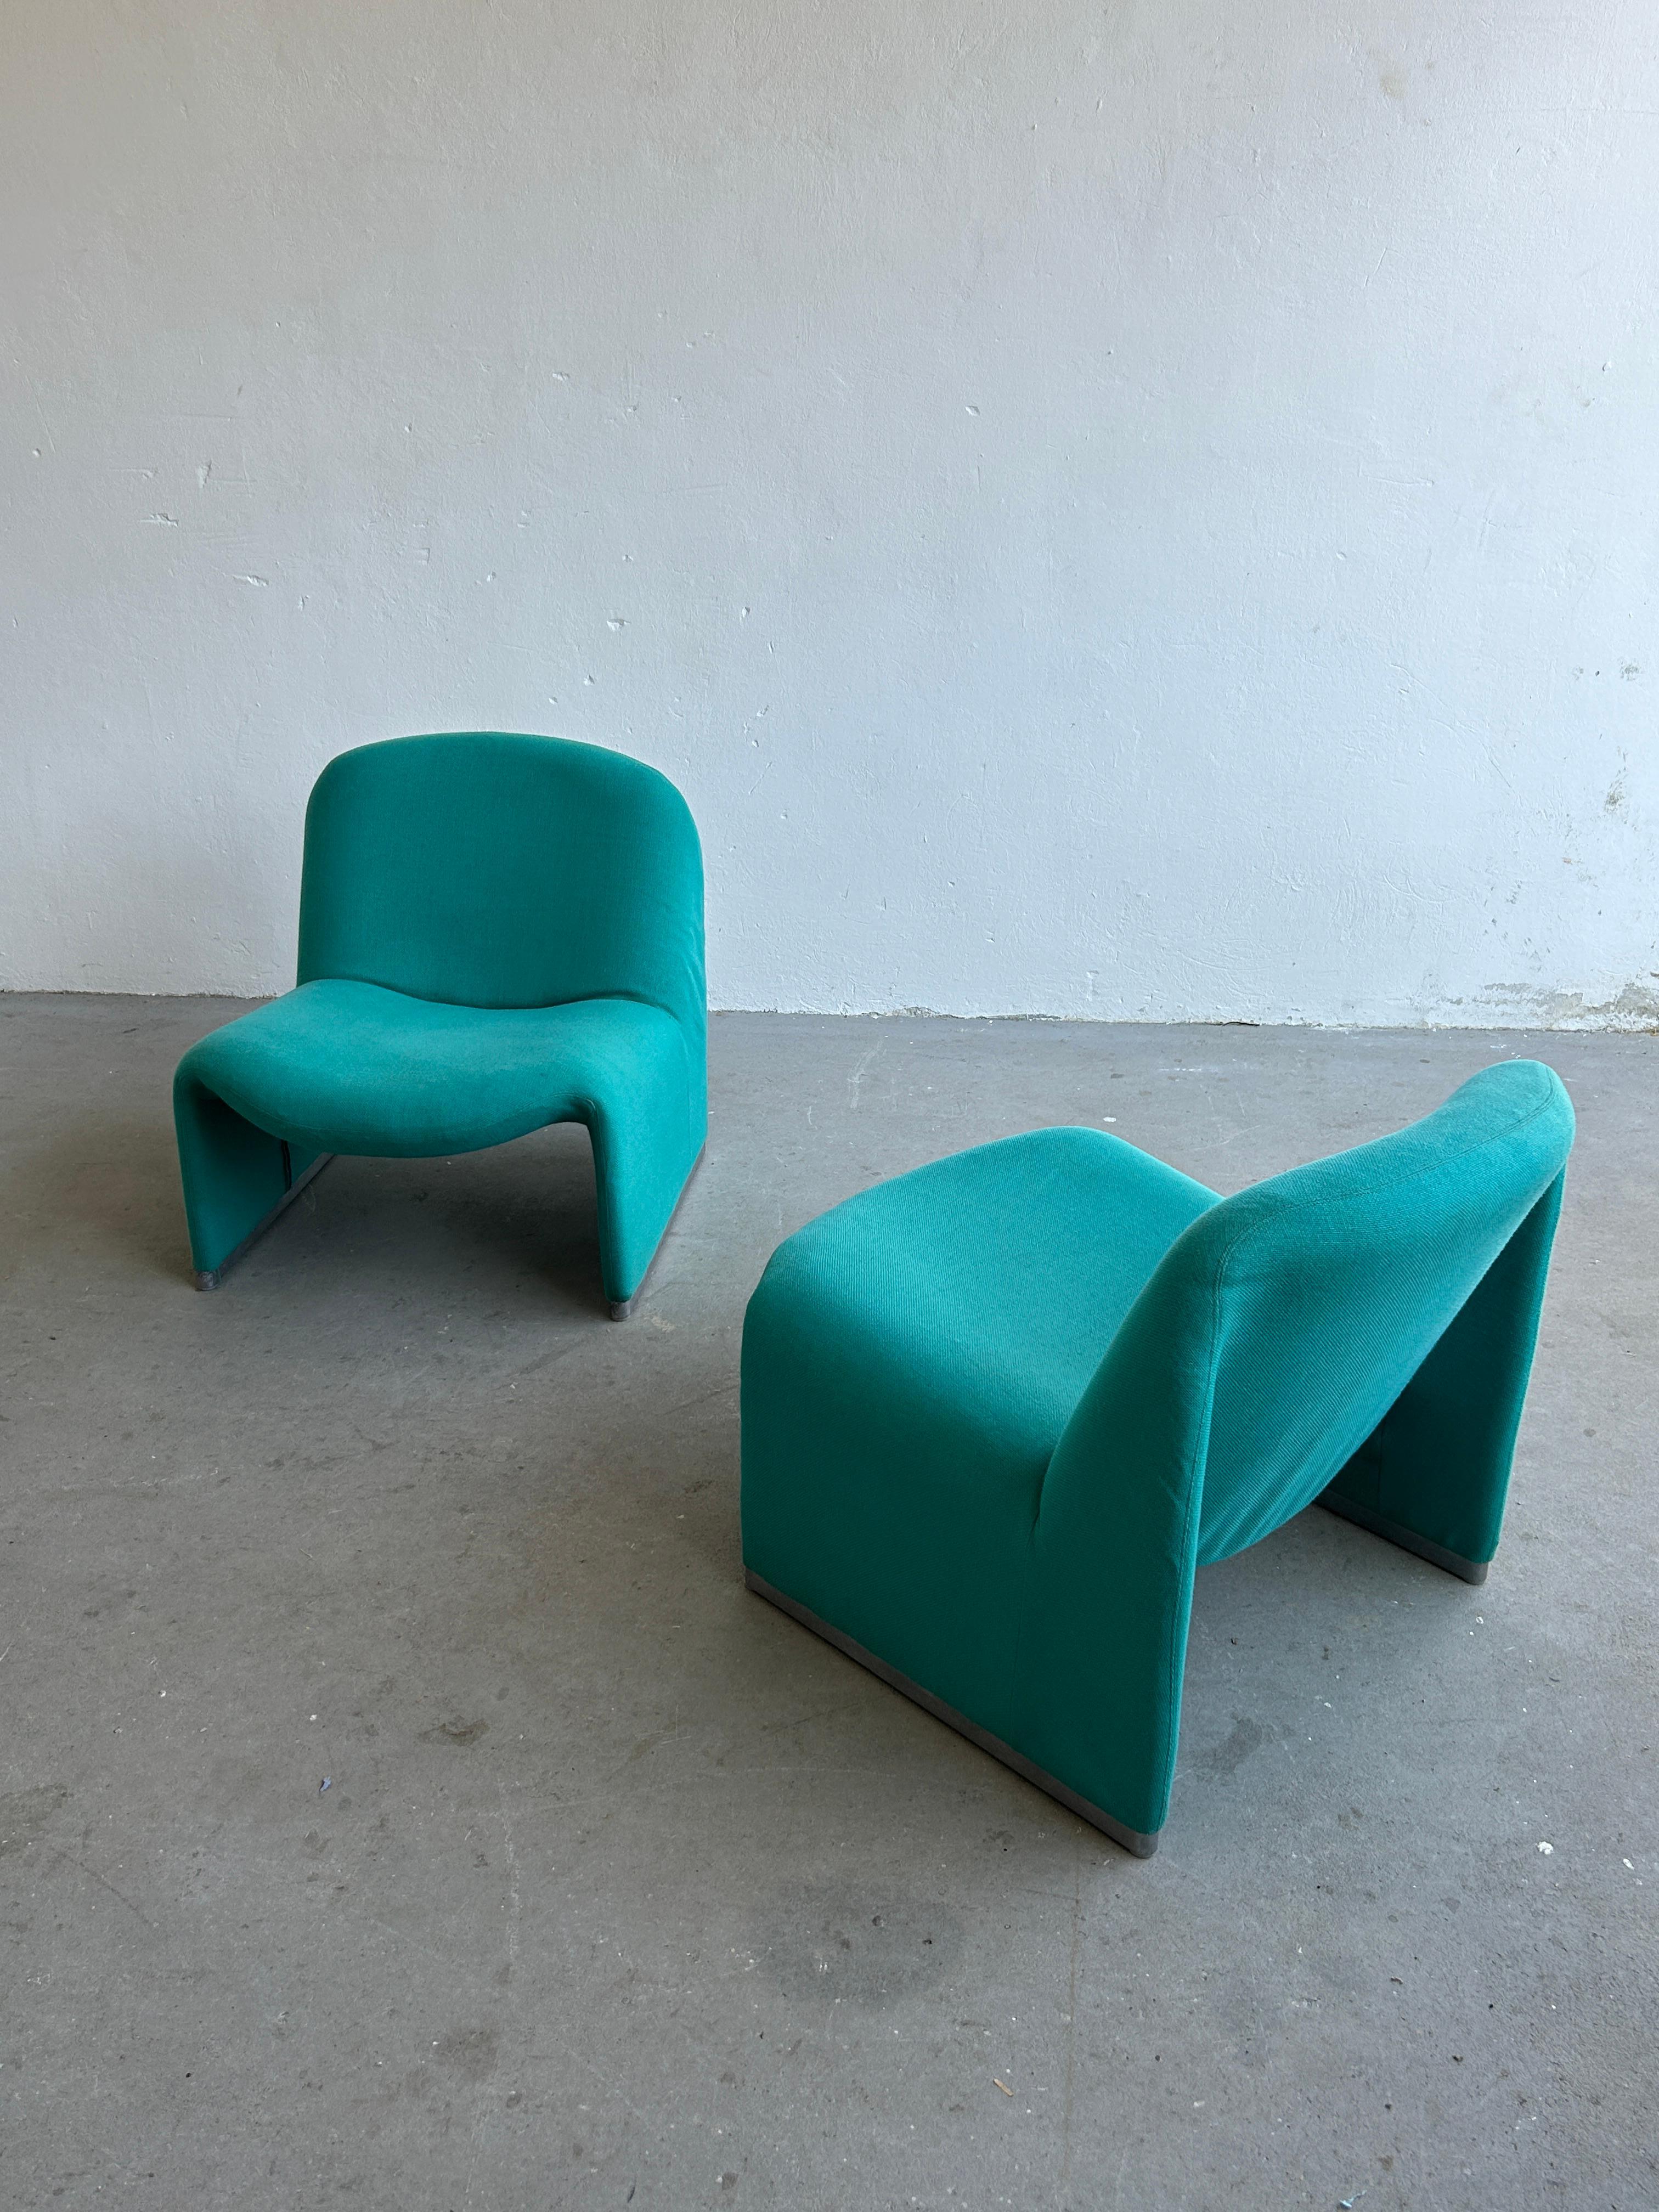 Late 20th Century Pair of Alky Chairs by Giancarlo Piretti for Anonima Castelli, 1970s Italy